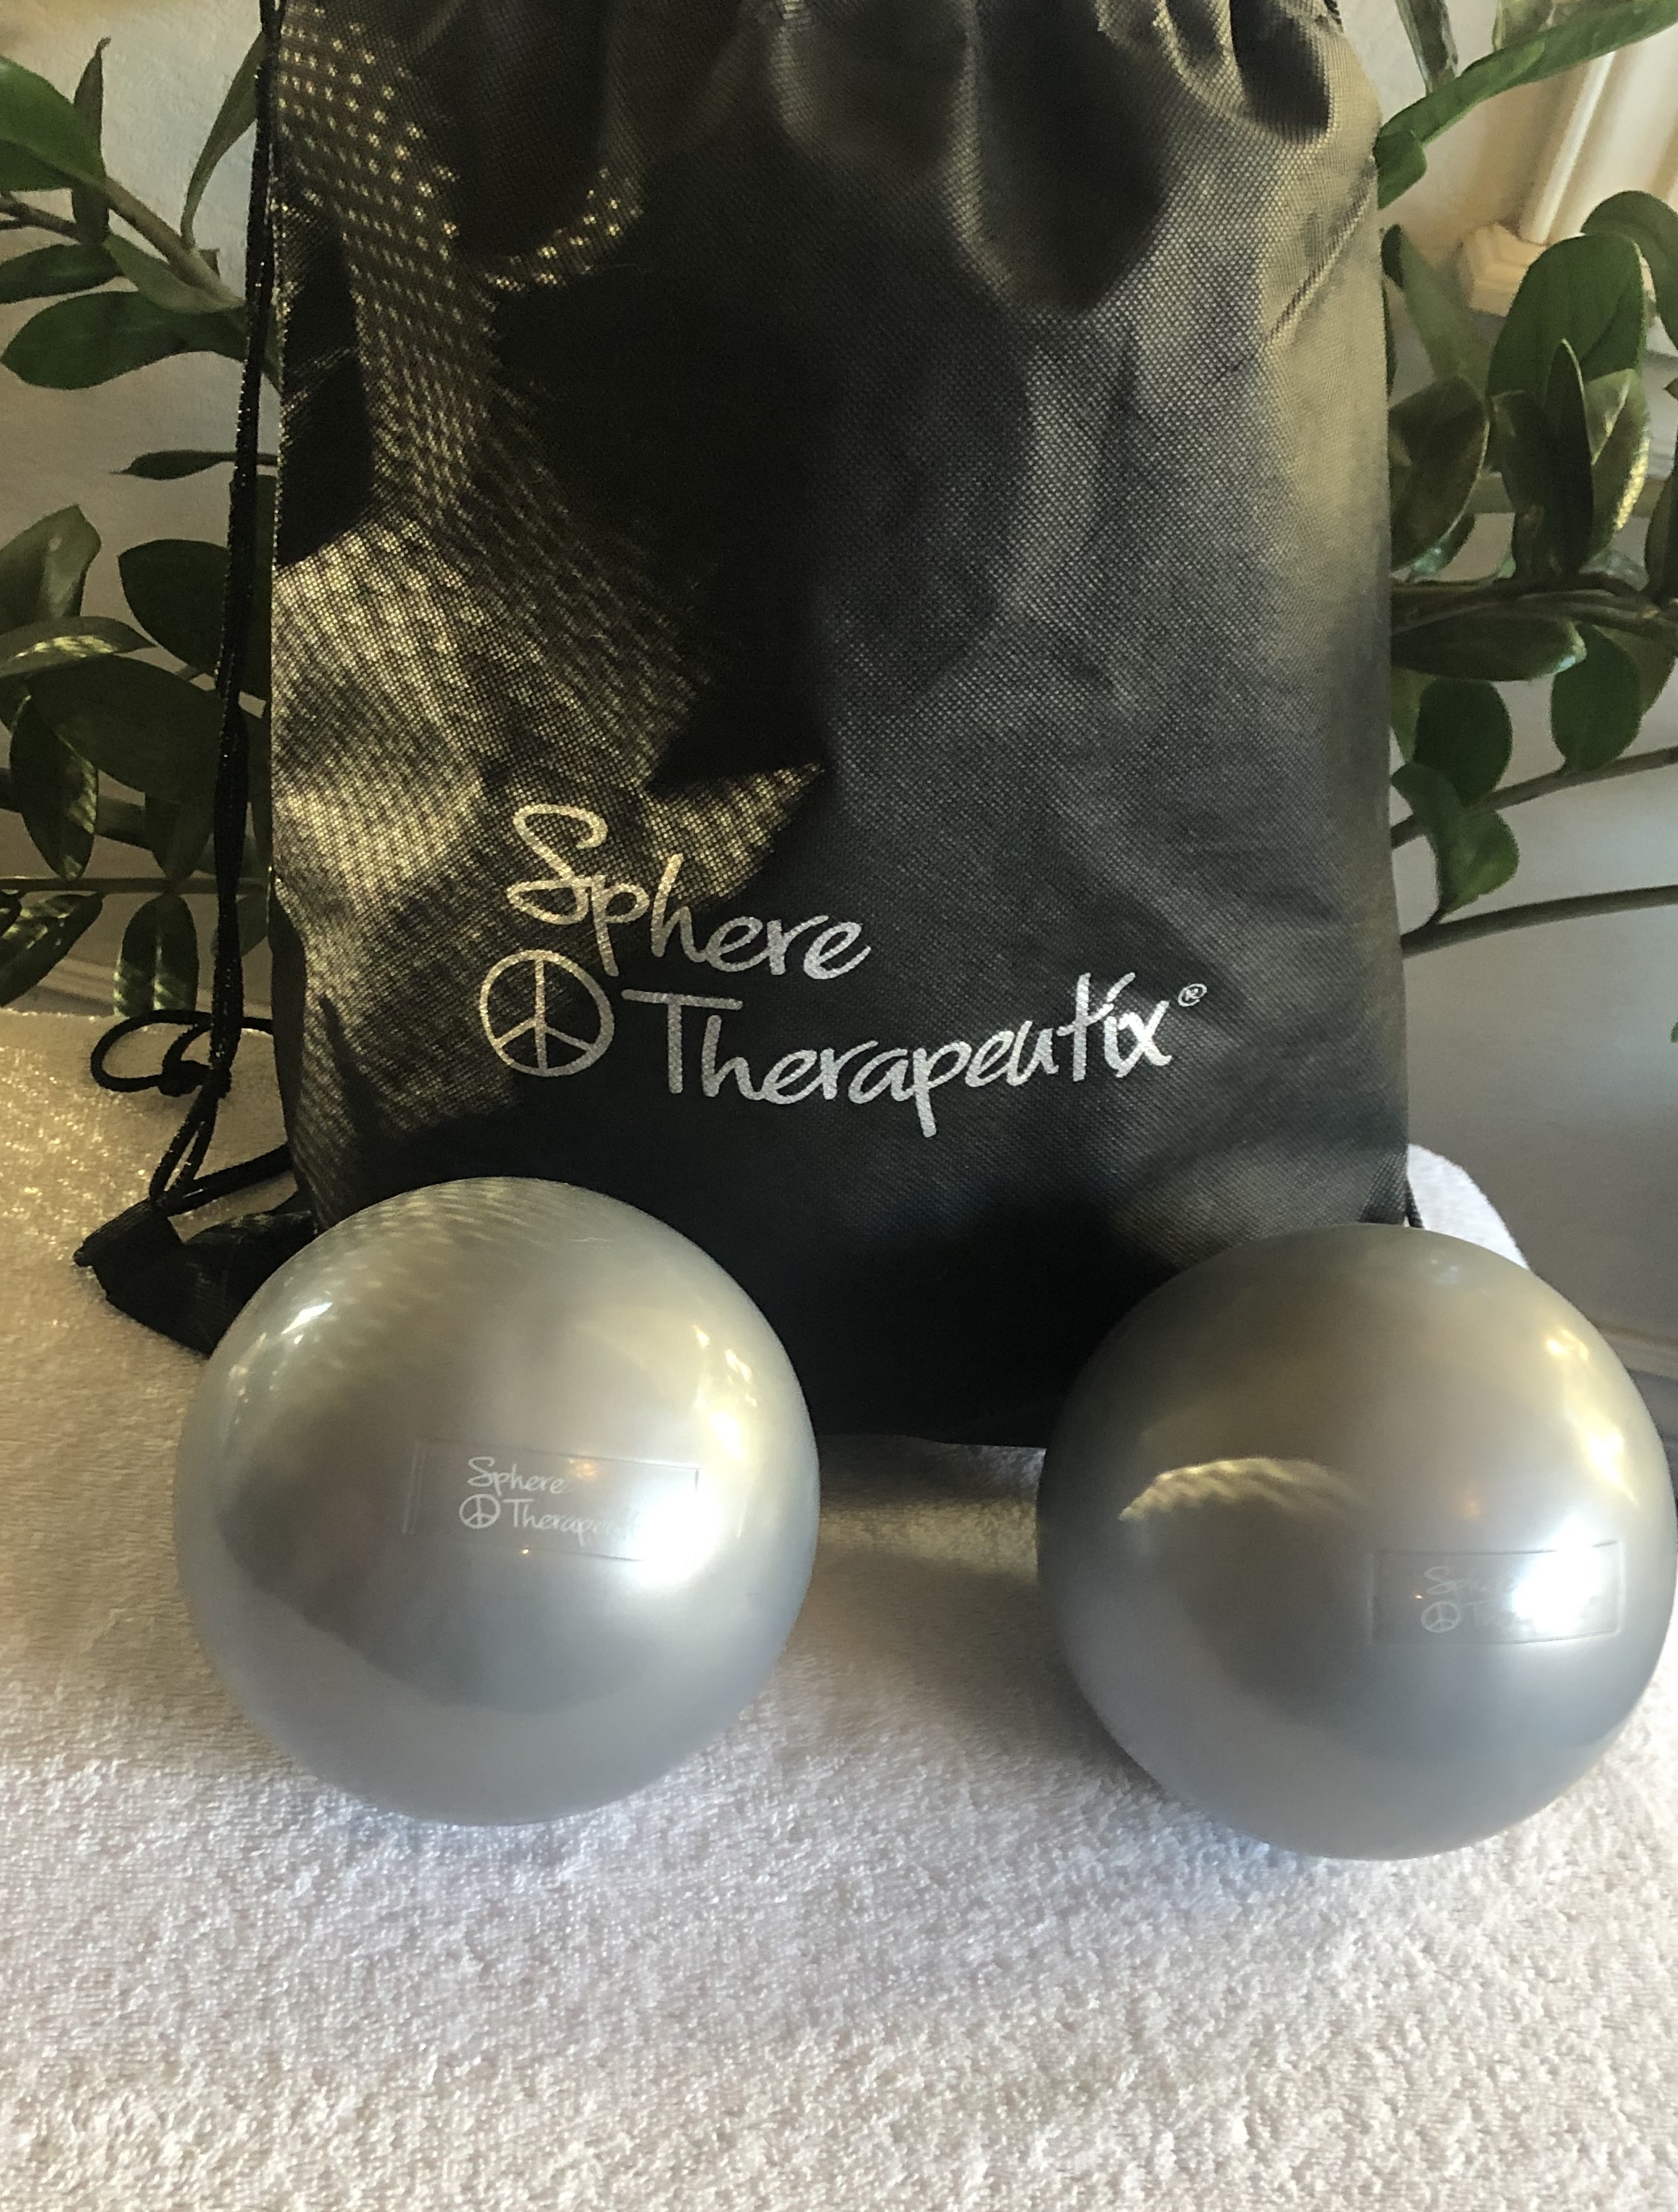 Sphere Therapeutix Air Filled Massage Spheres